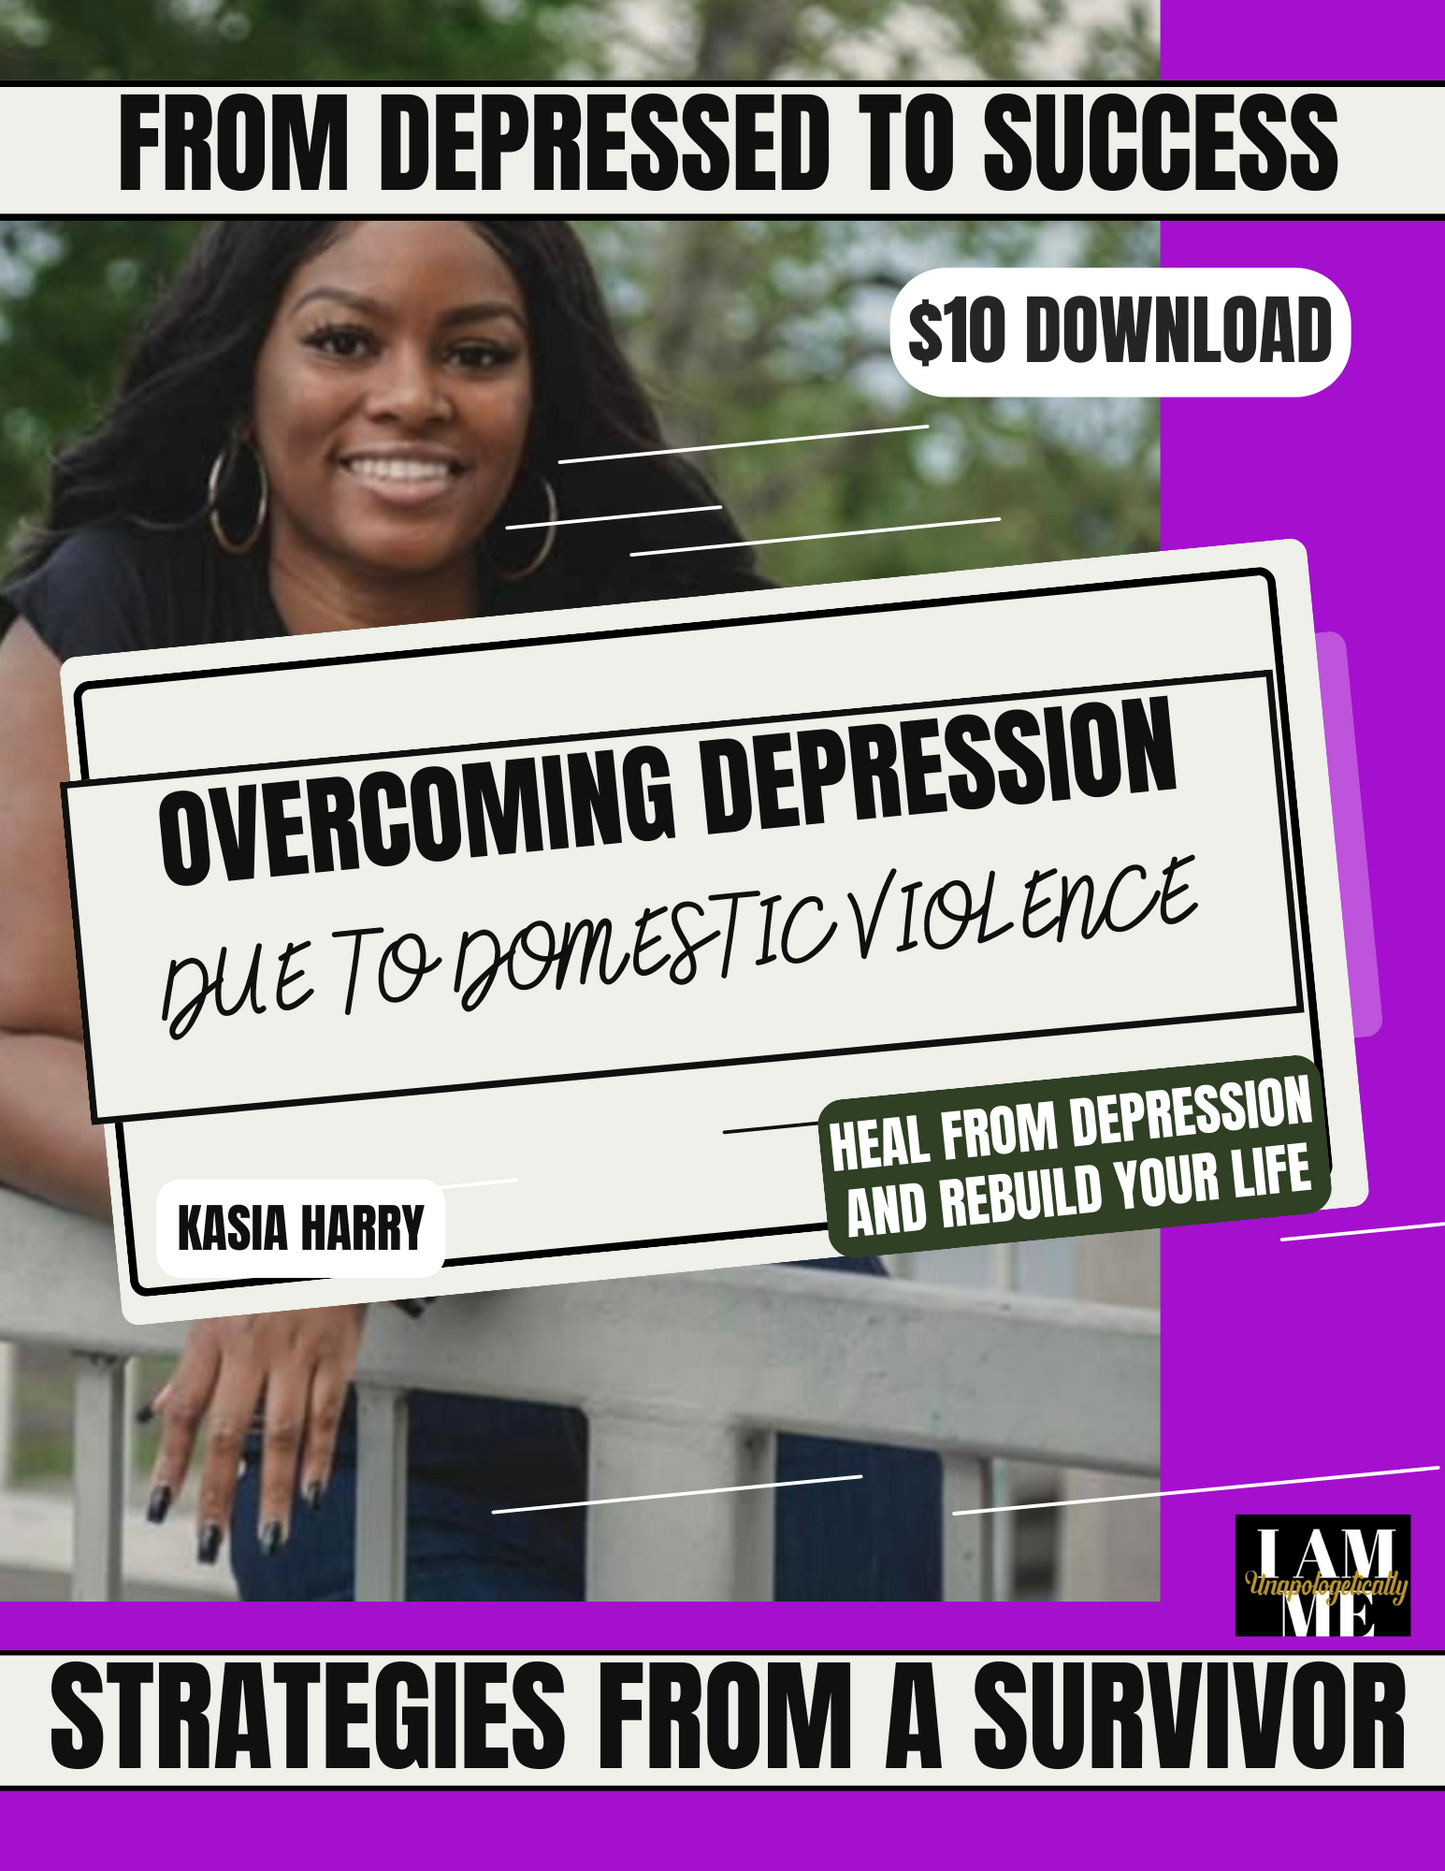 Overcoming Depression due to Domestic Violence